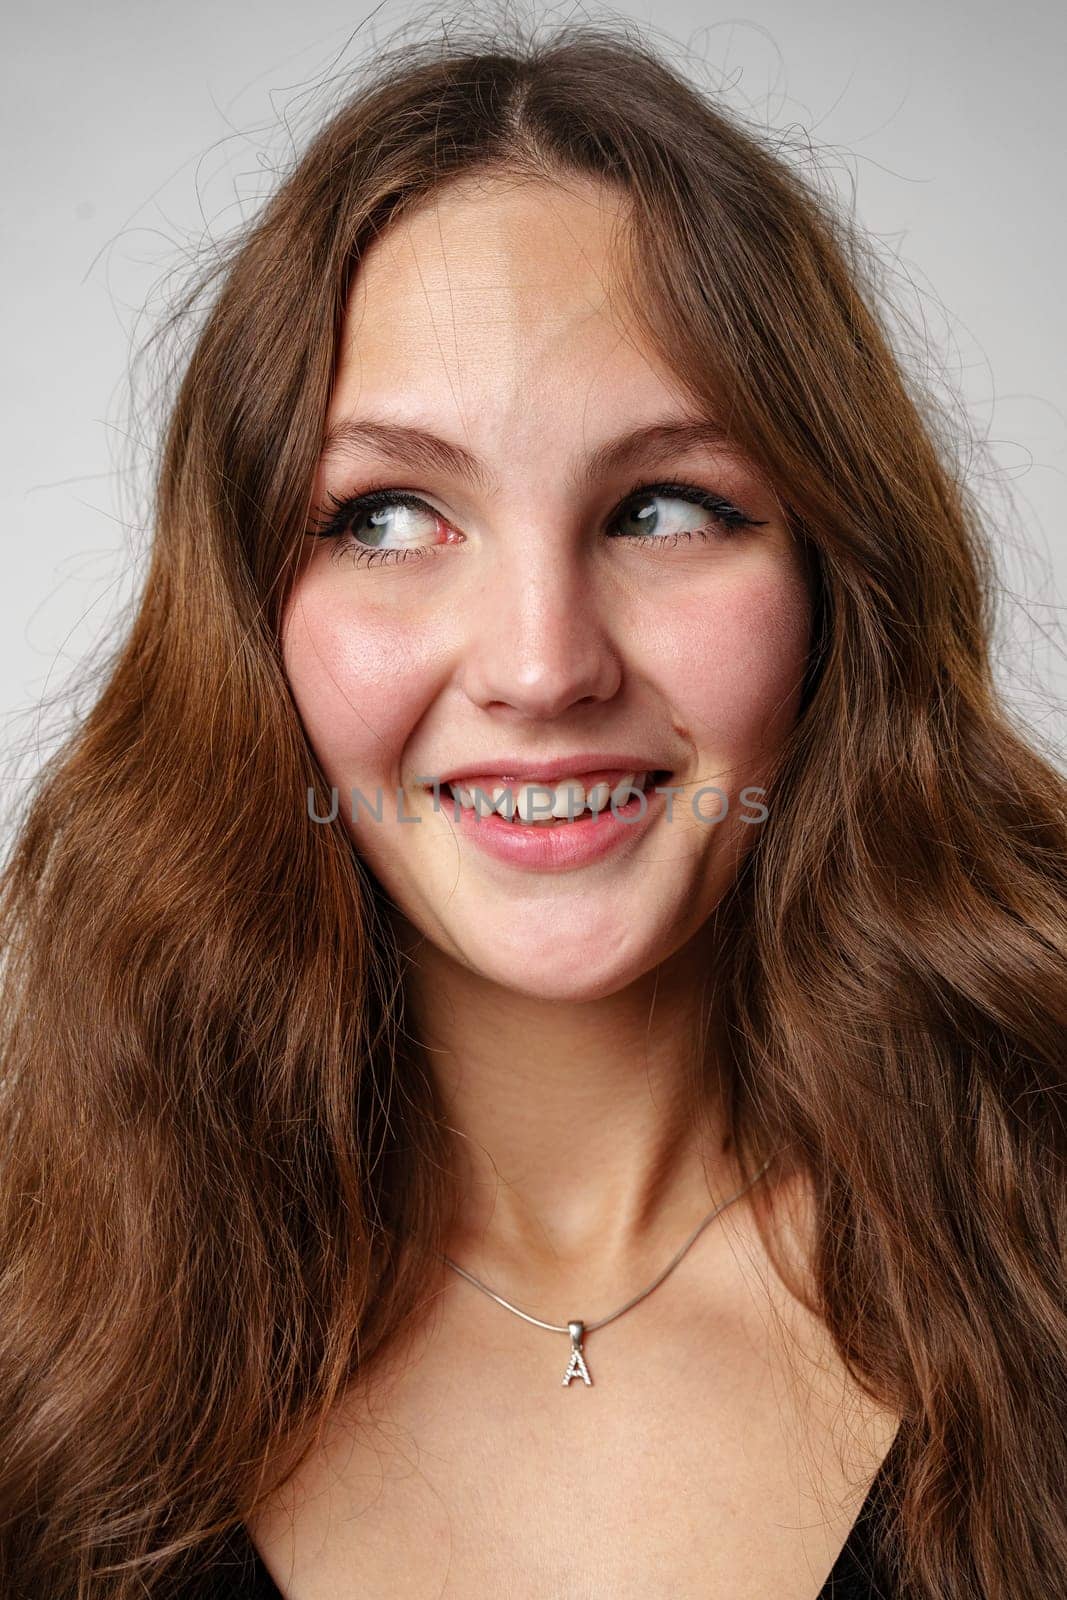 A woman with long brown hair is smiling directly at the camera, showing a sense of joy and positivity. Her facial expression is warm and friendly, radiating happiness and confidence.